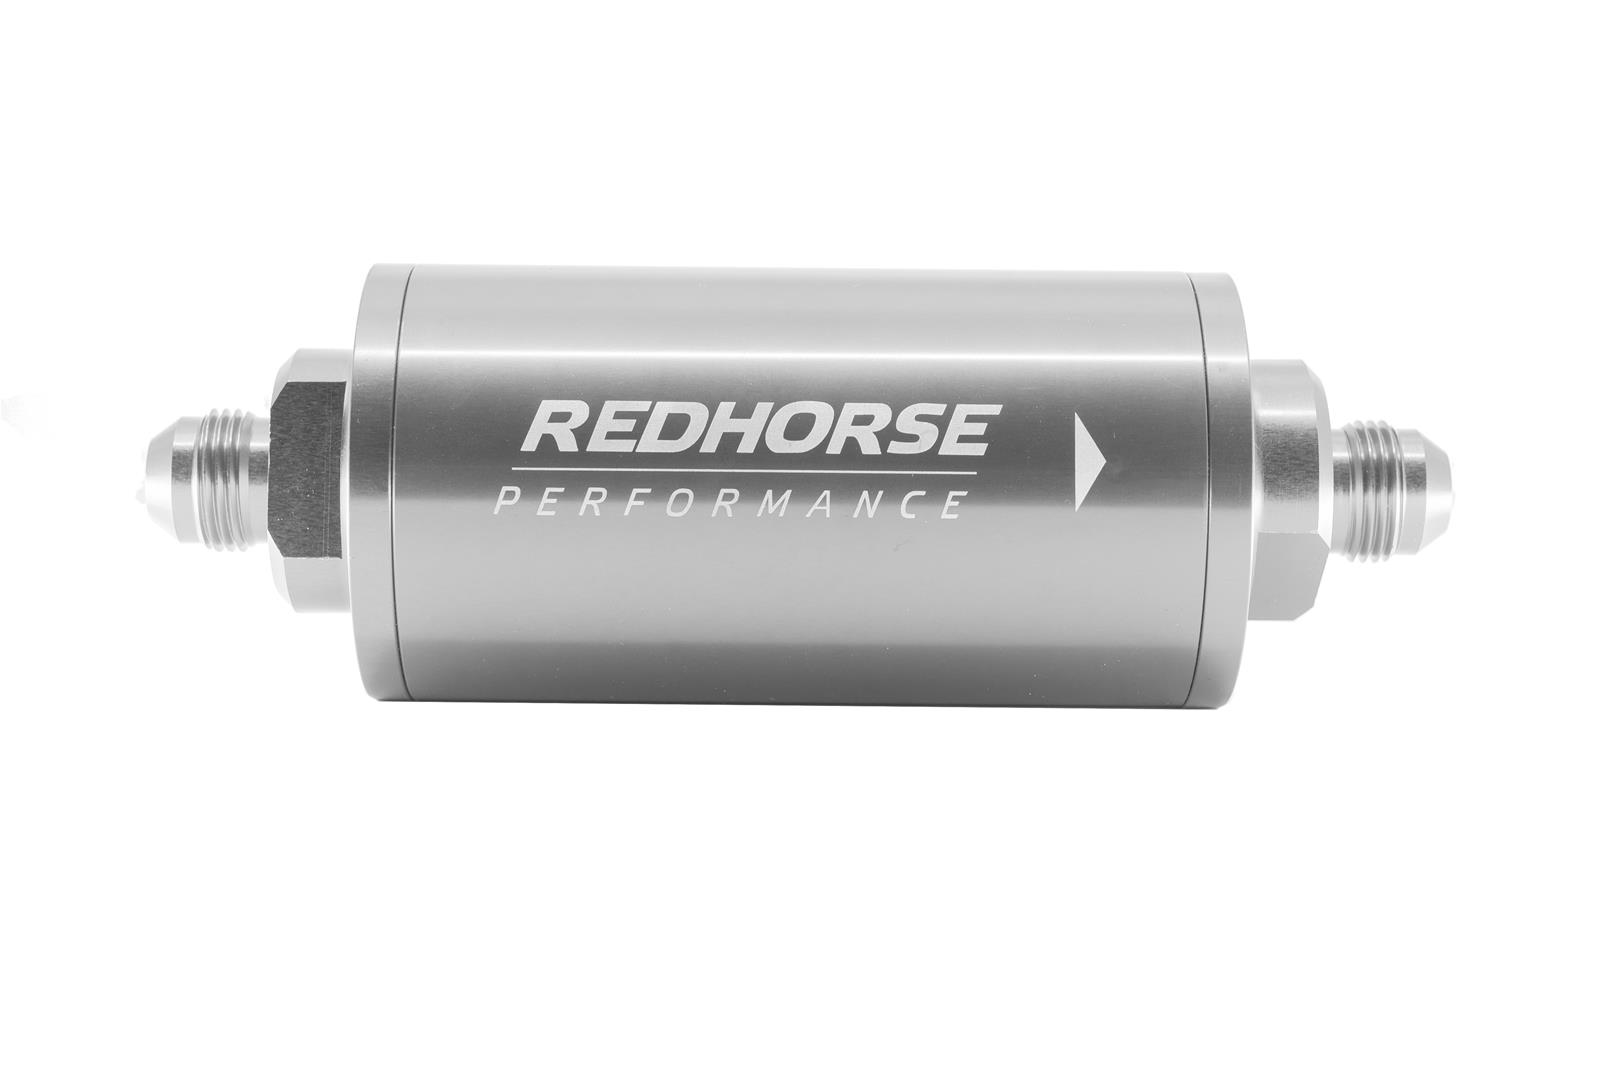 Redhorse Performance 4651-08-5-100 6in Cylindrical In-Line Race Fuel Filter w/ 100 Micron S.S. element - 08 AN